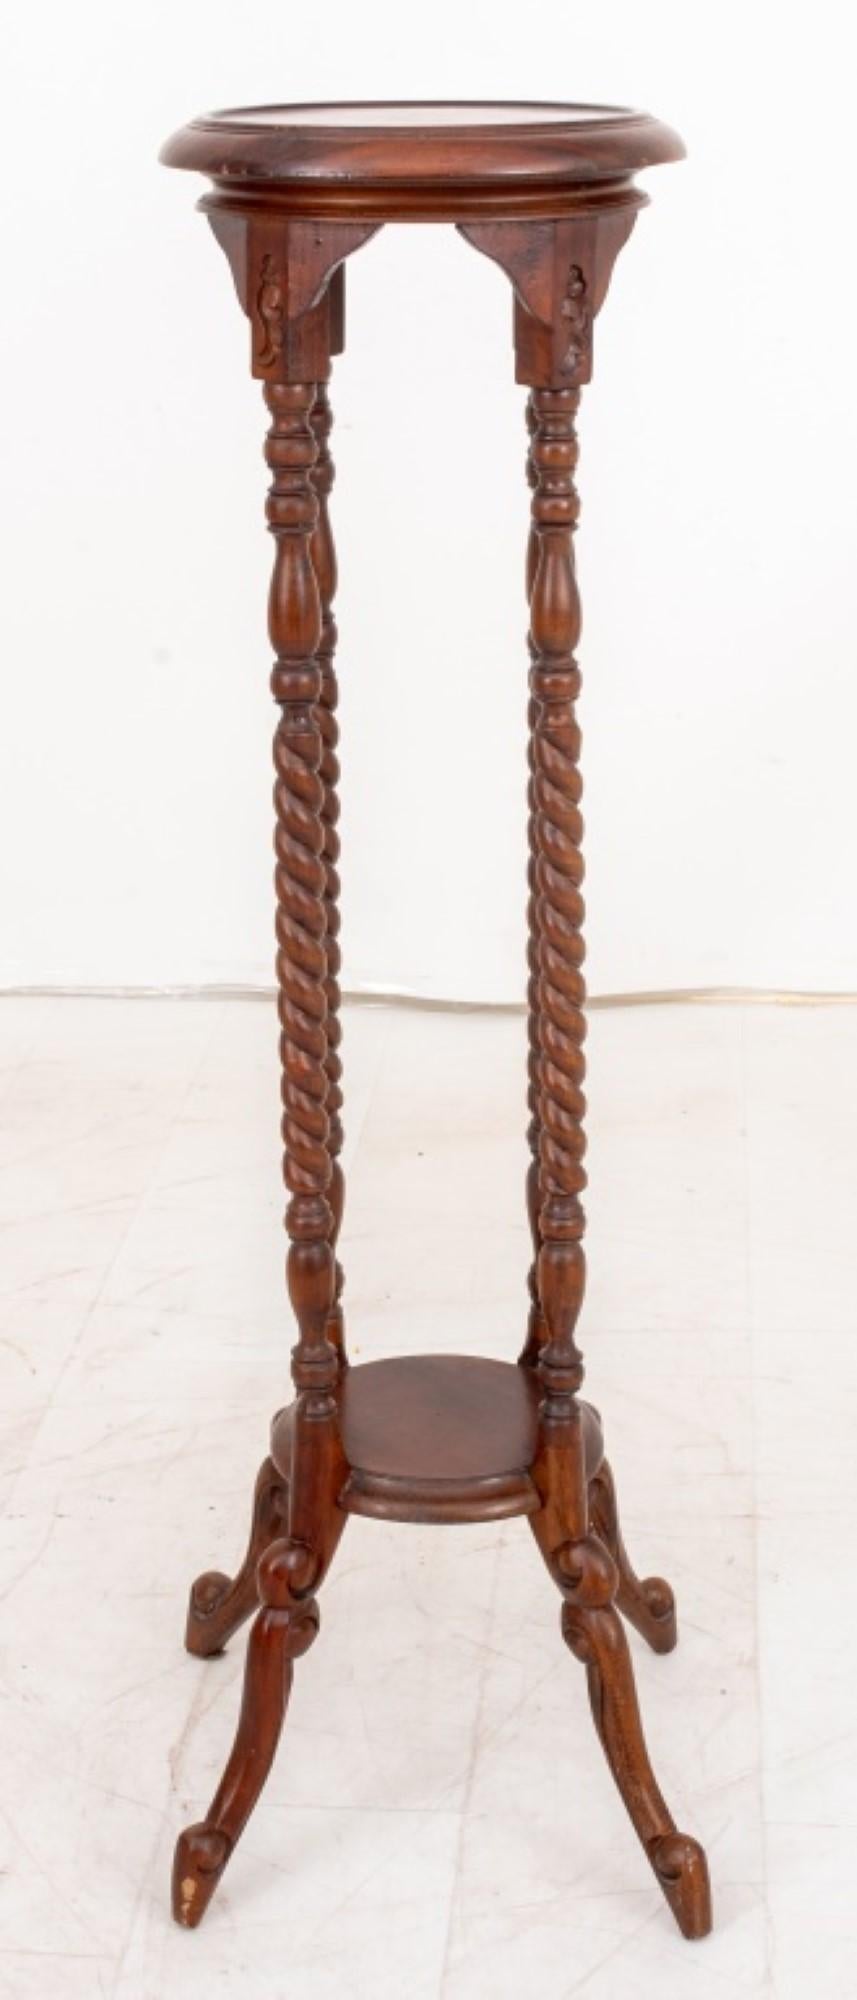 Mahogany Barley-Twist Pedestal

Design: Circular top supported by four turned and twisted columns.
Construction: Joined by an entretoise above splay feet.

Dimensions: 42